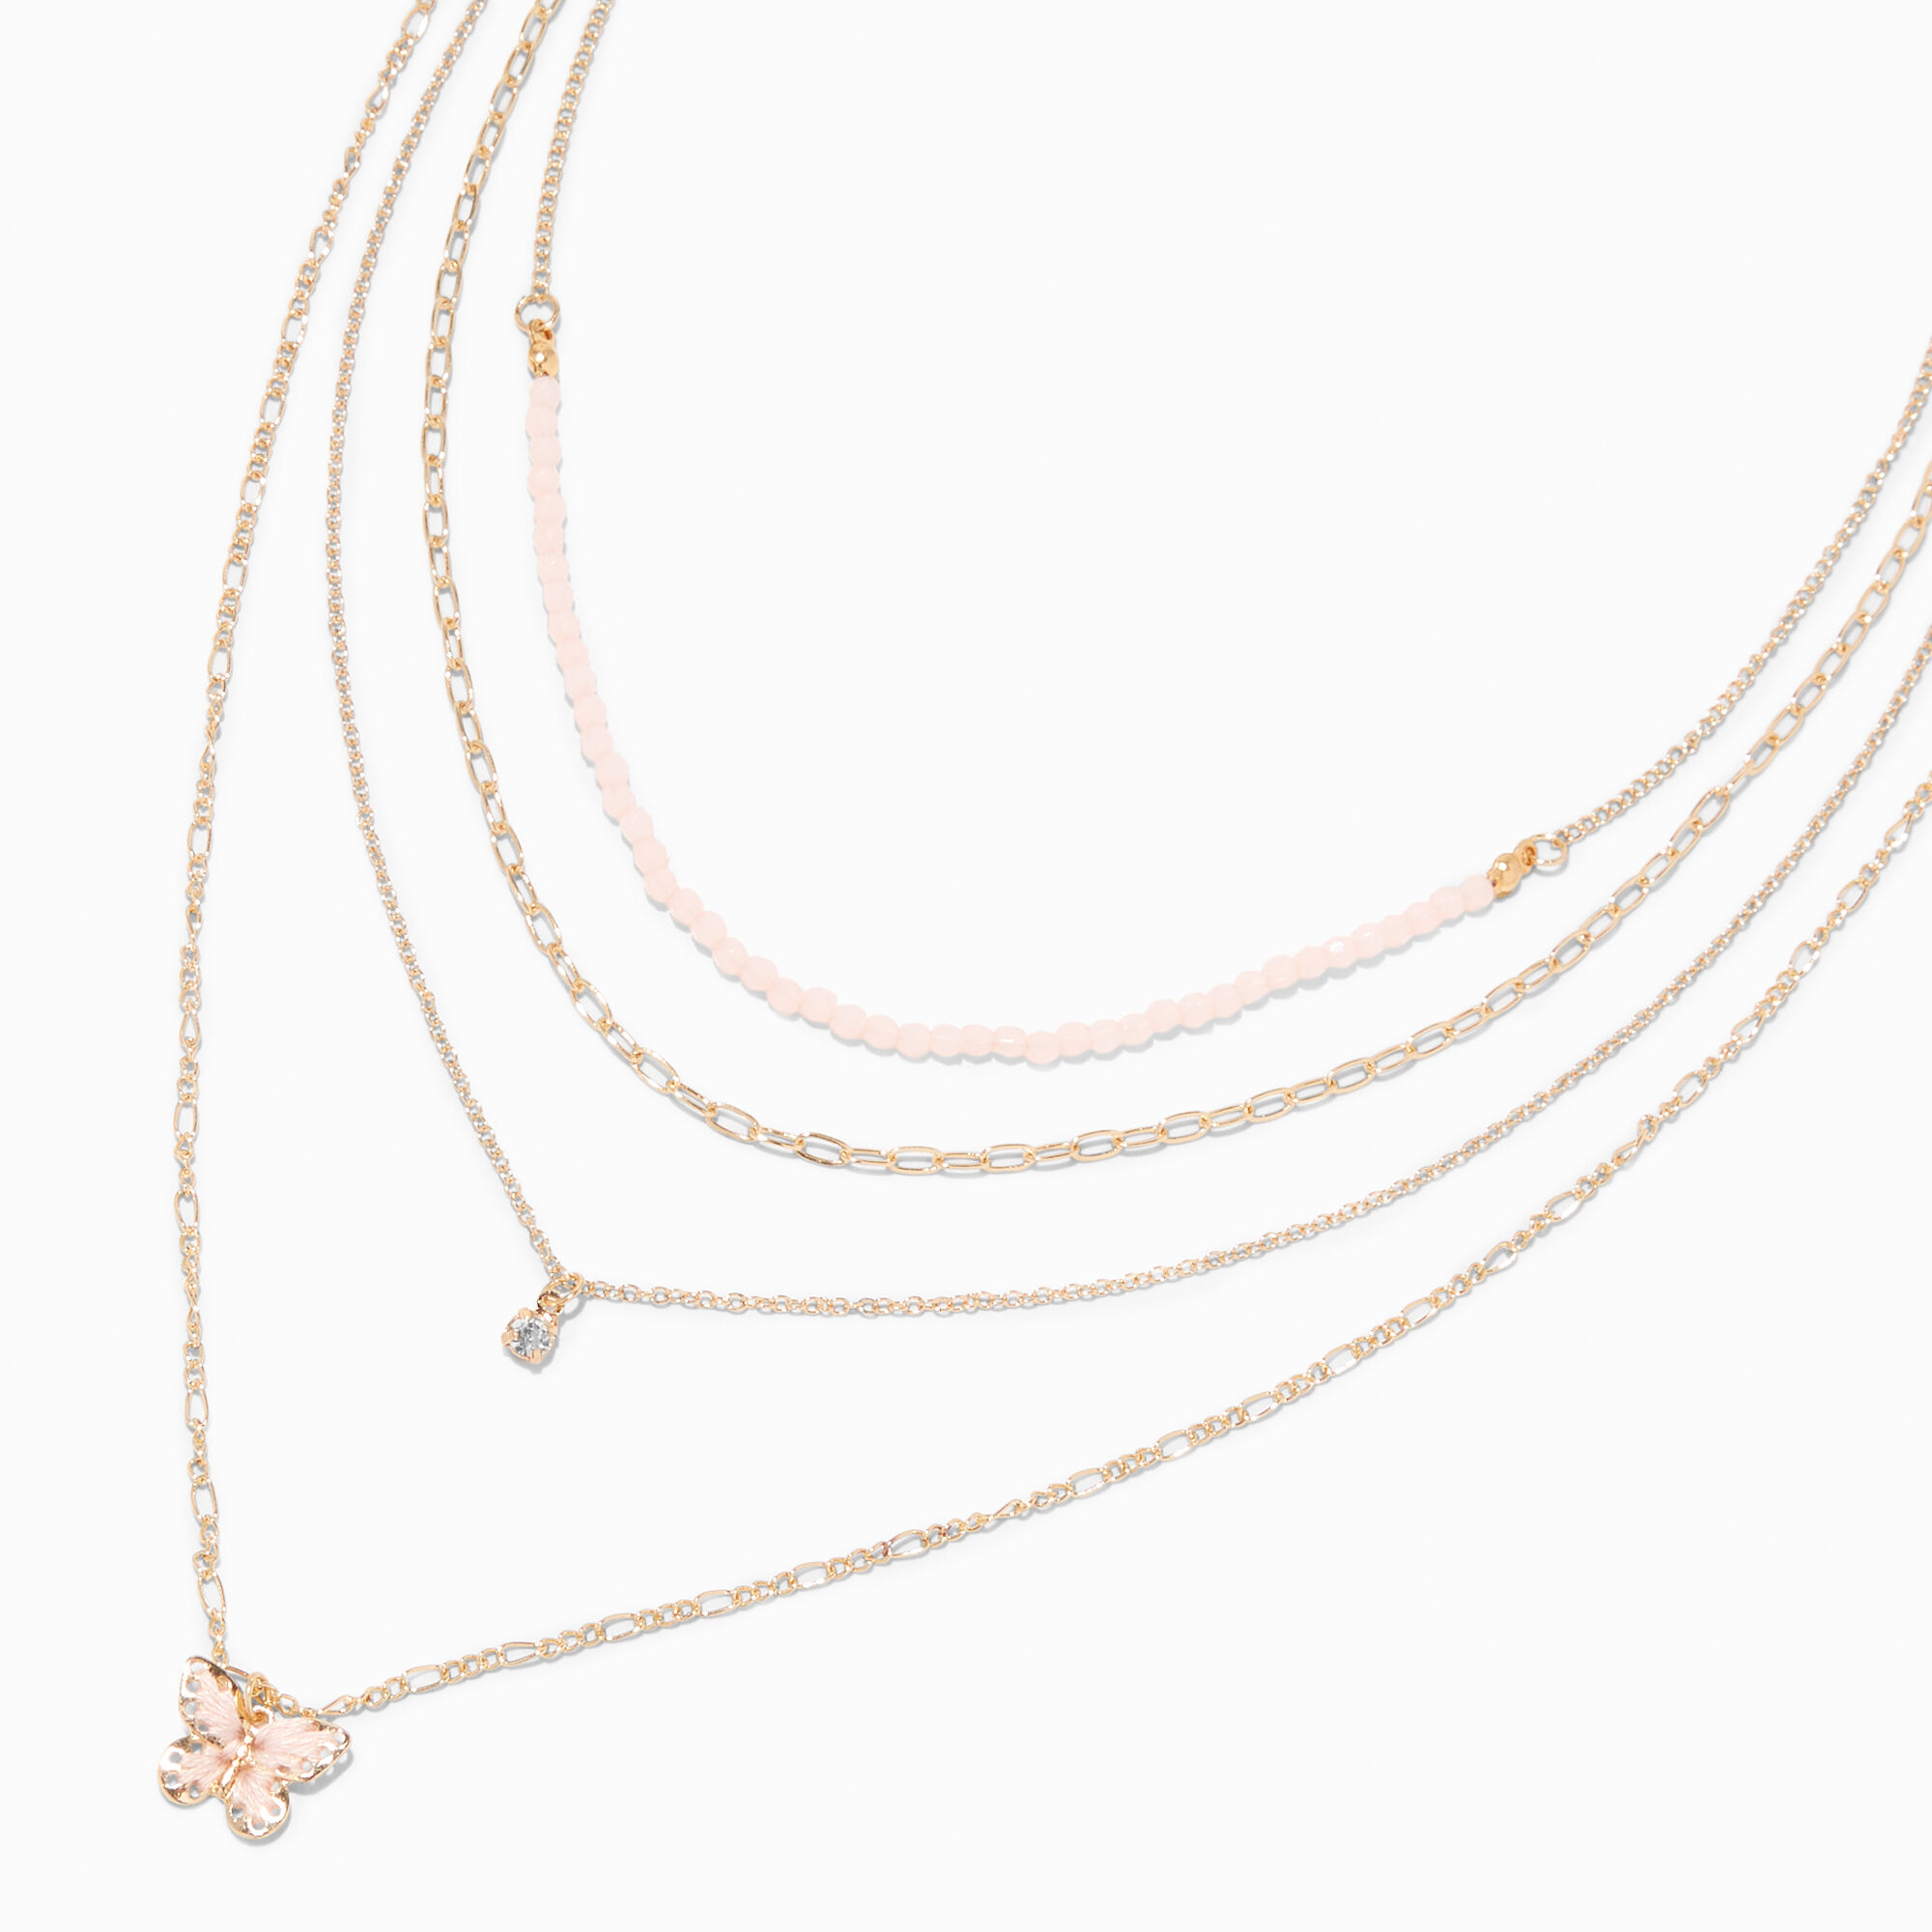 View Claires Butterfly Seed Bead GoldTone Multi Strand Silver Chain Necklace Pink information